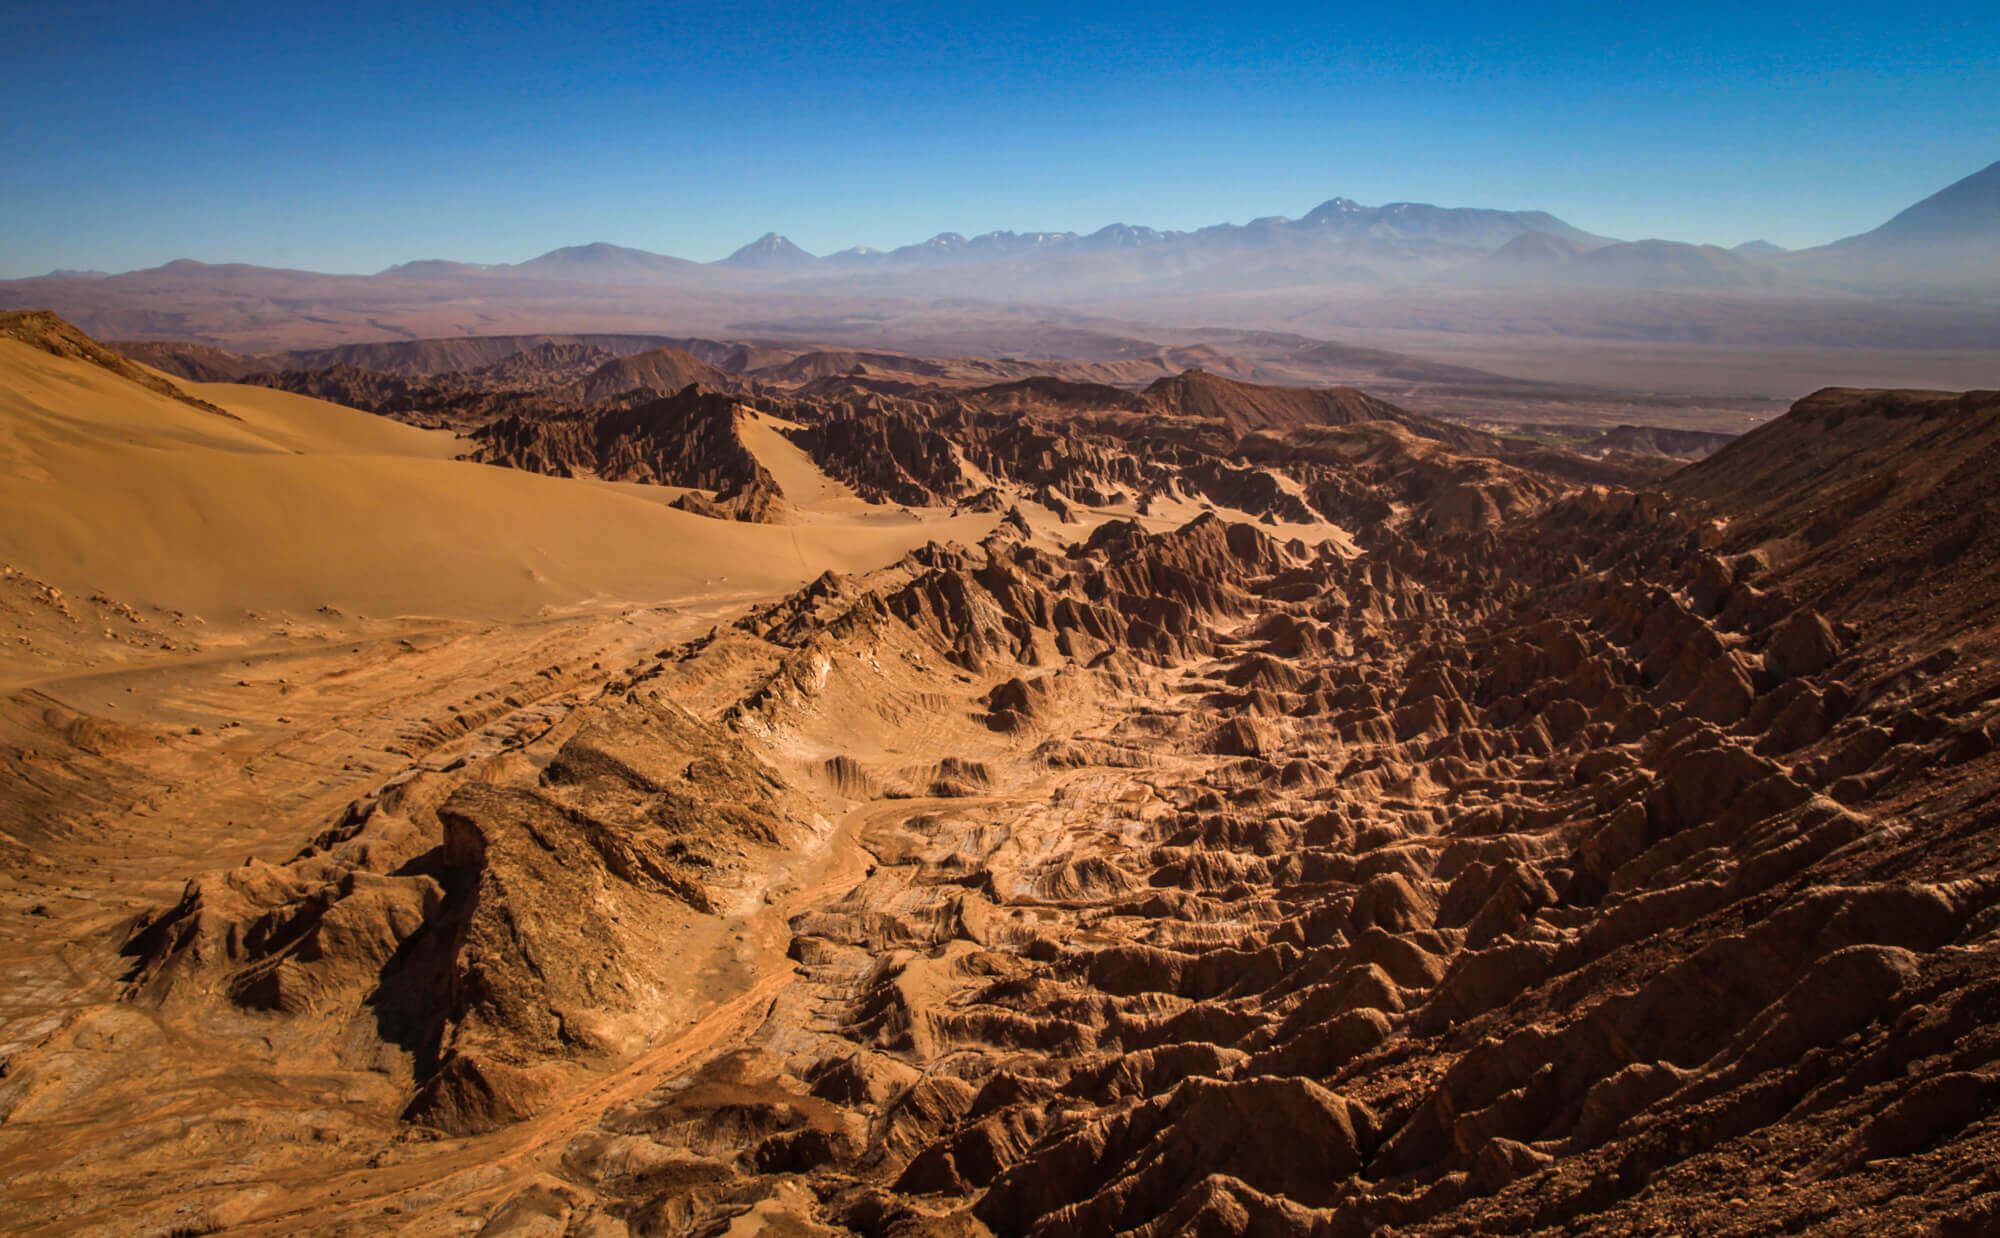 The Valley of the Moon in the Atacama Desert. Known for its